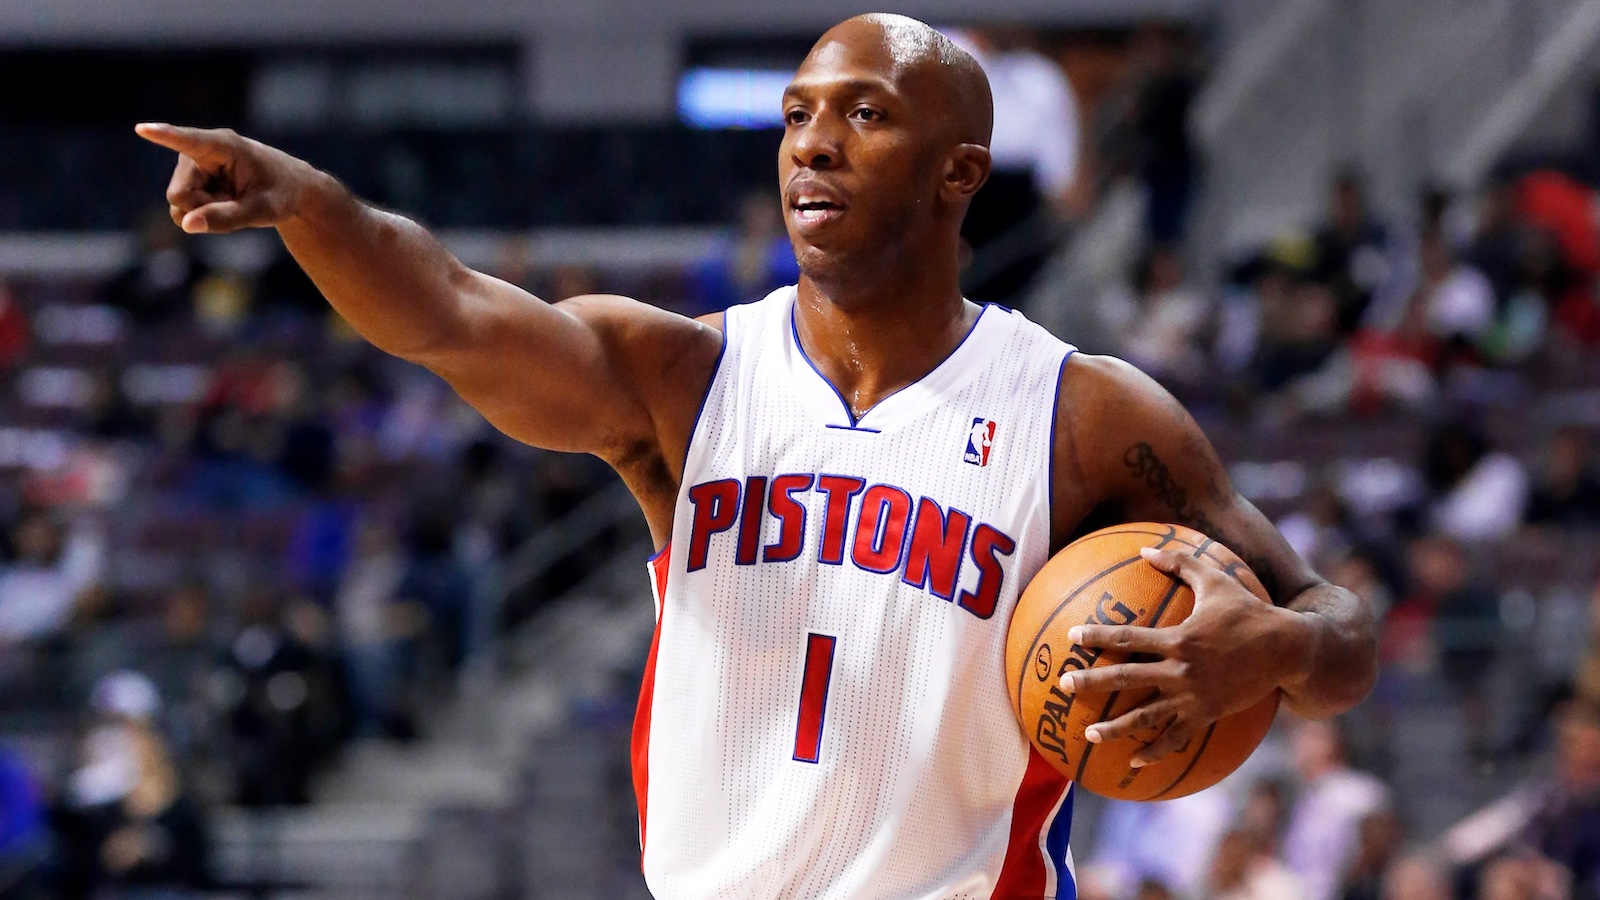 Justin Kubatko Chauncey Billups A Hall Of Famer? Breaking Down The Hall Of Fame Case For Chauncey Billups. Read And Subscribe